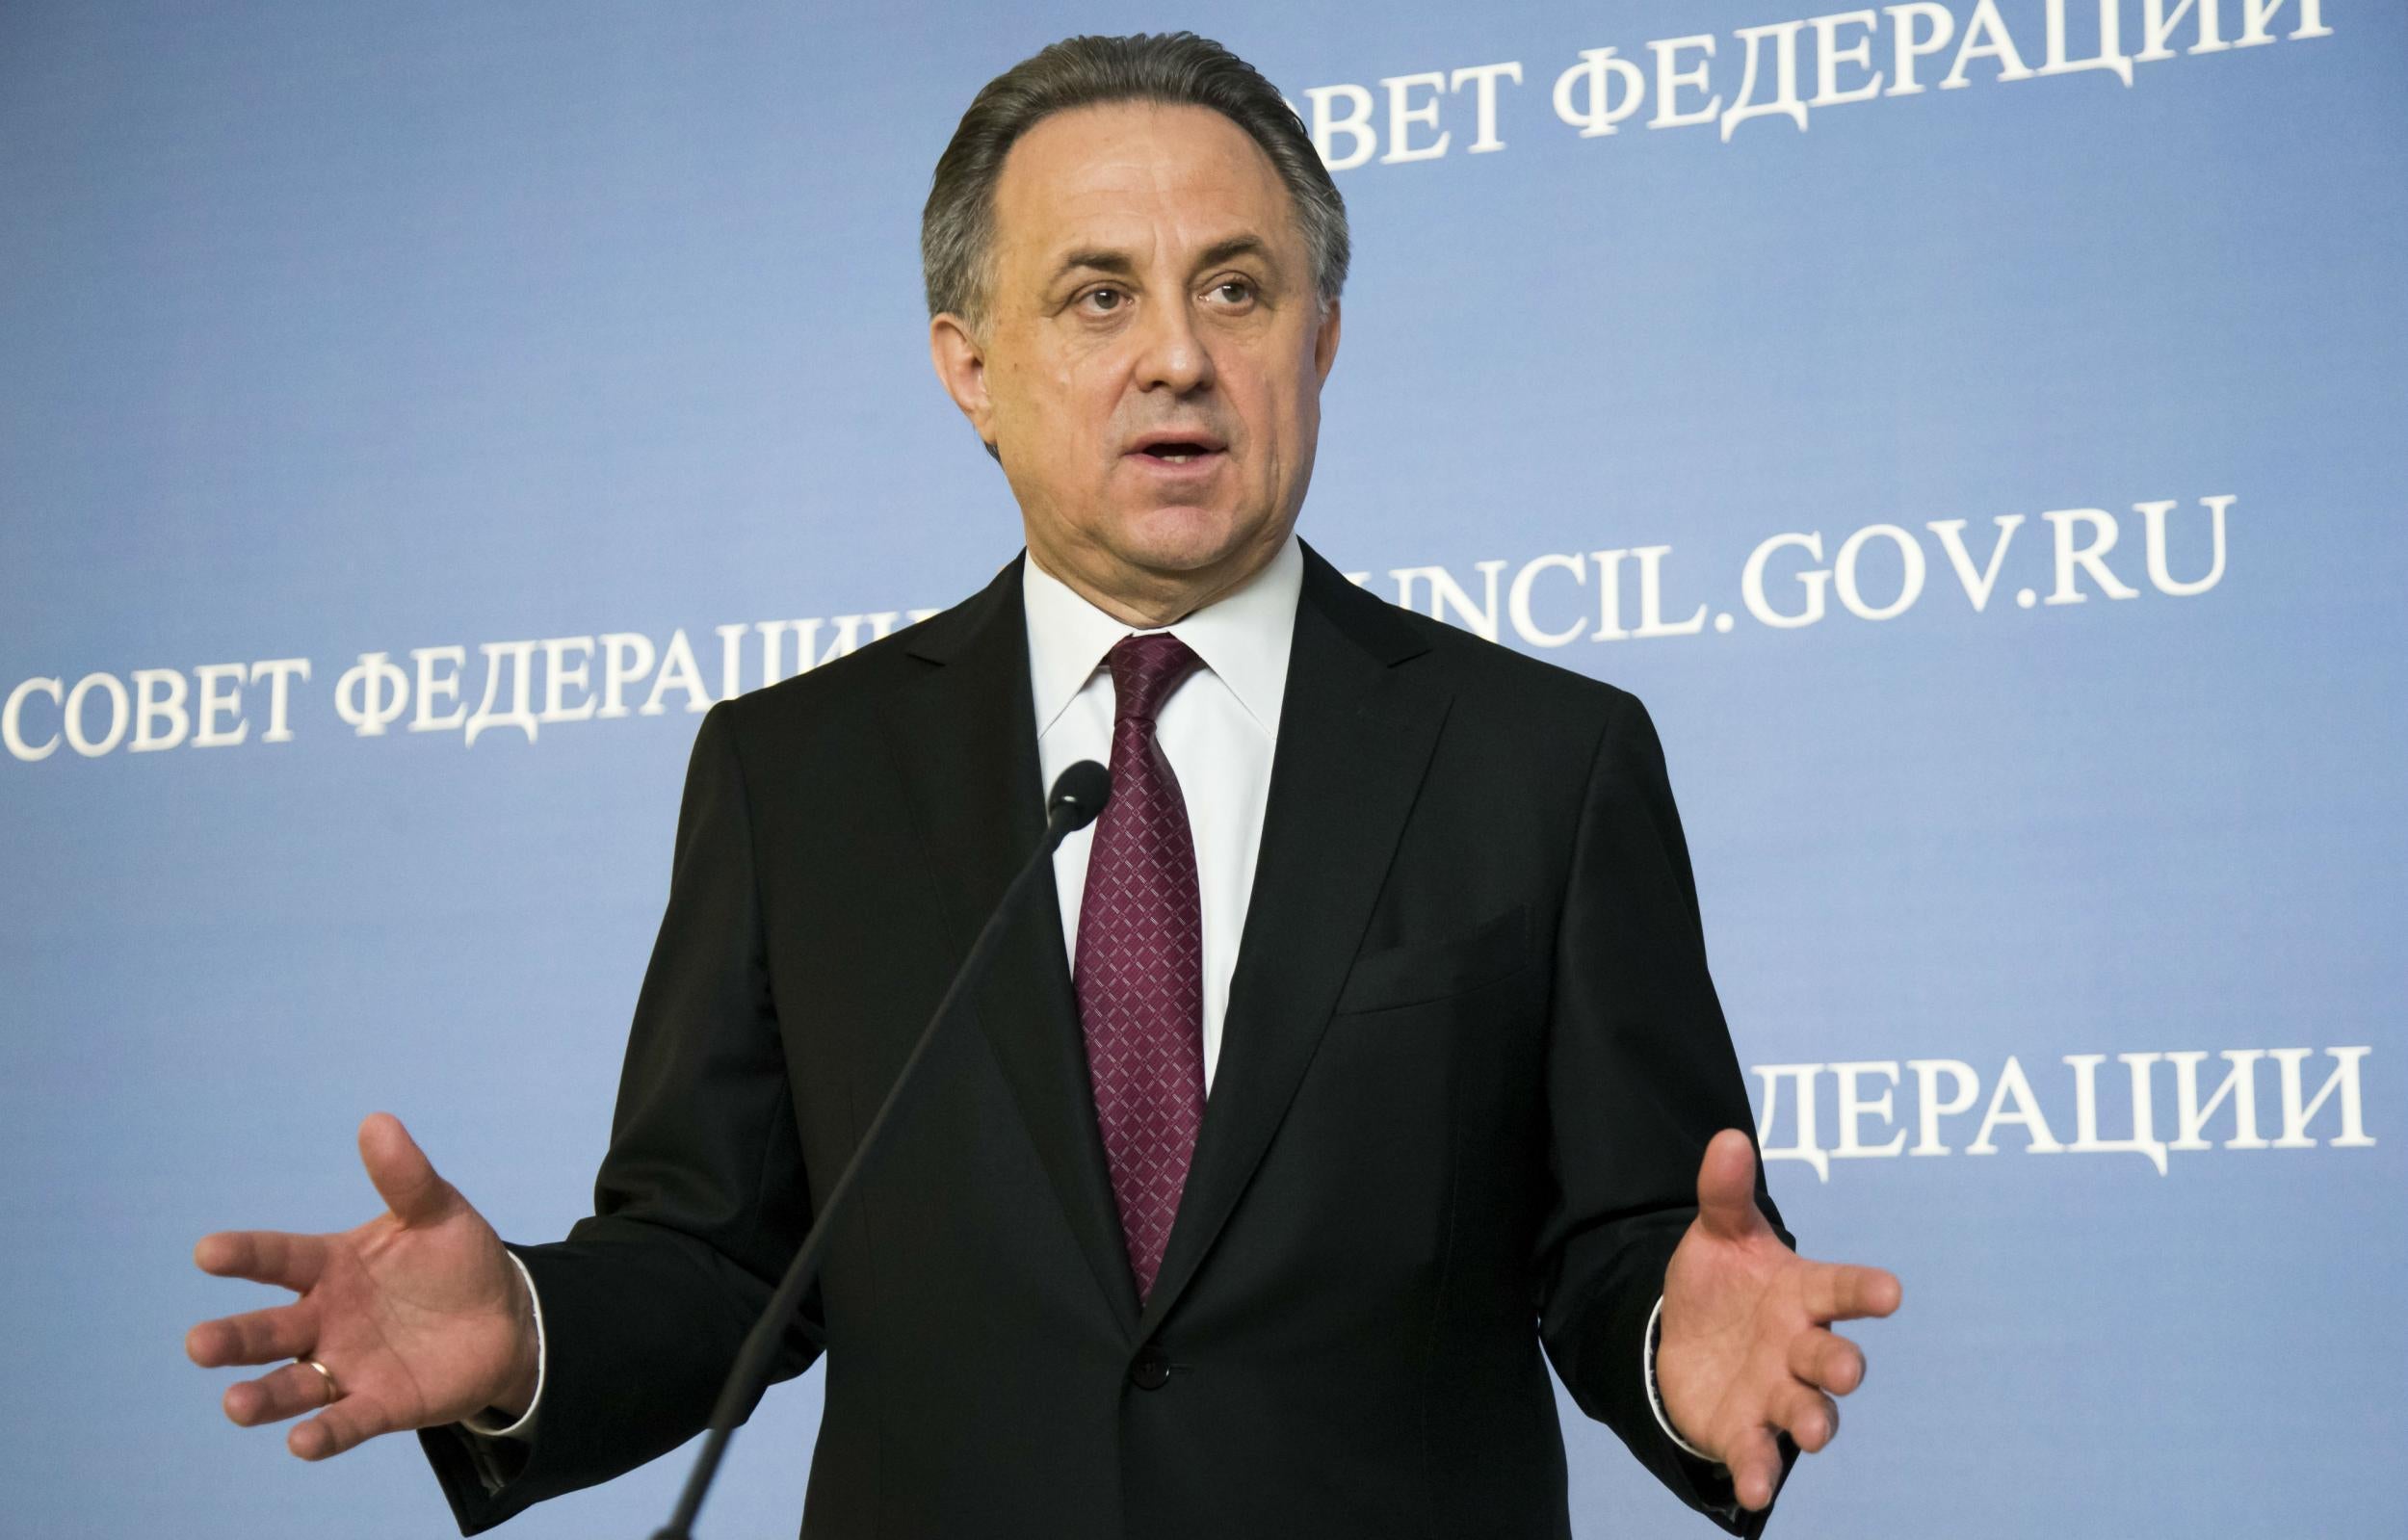 Vitaly Mutko has been banned for life from the Olympic Games